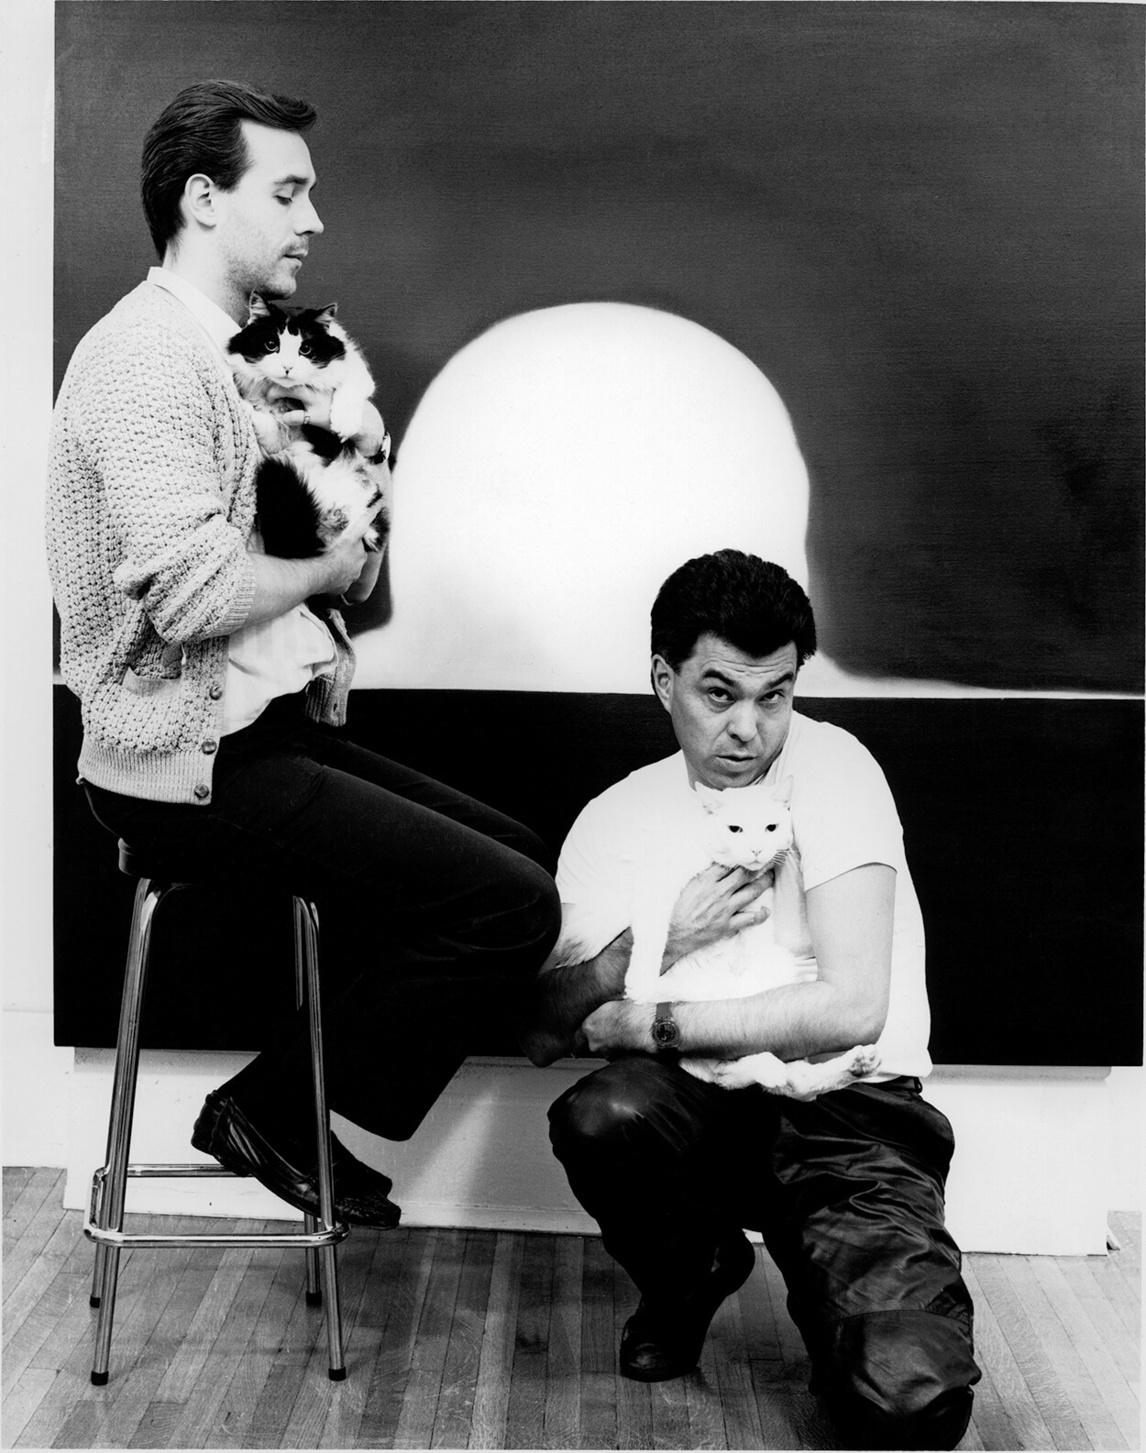 Paul Gardner and Robert Houle with their cats, 1988